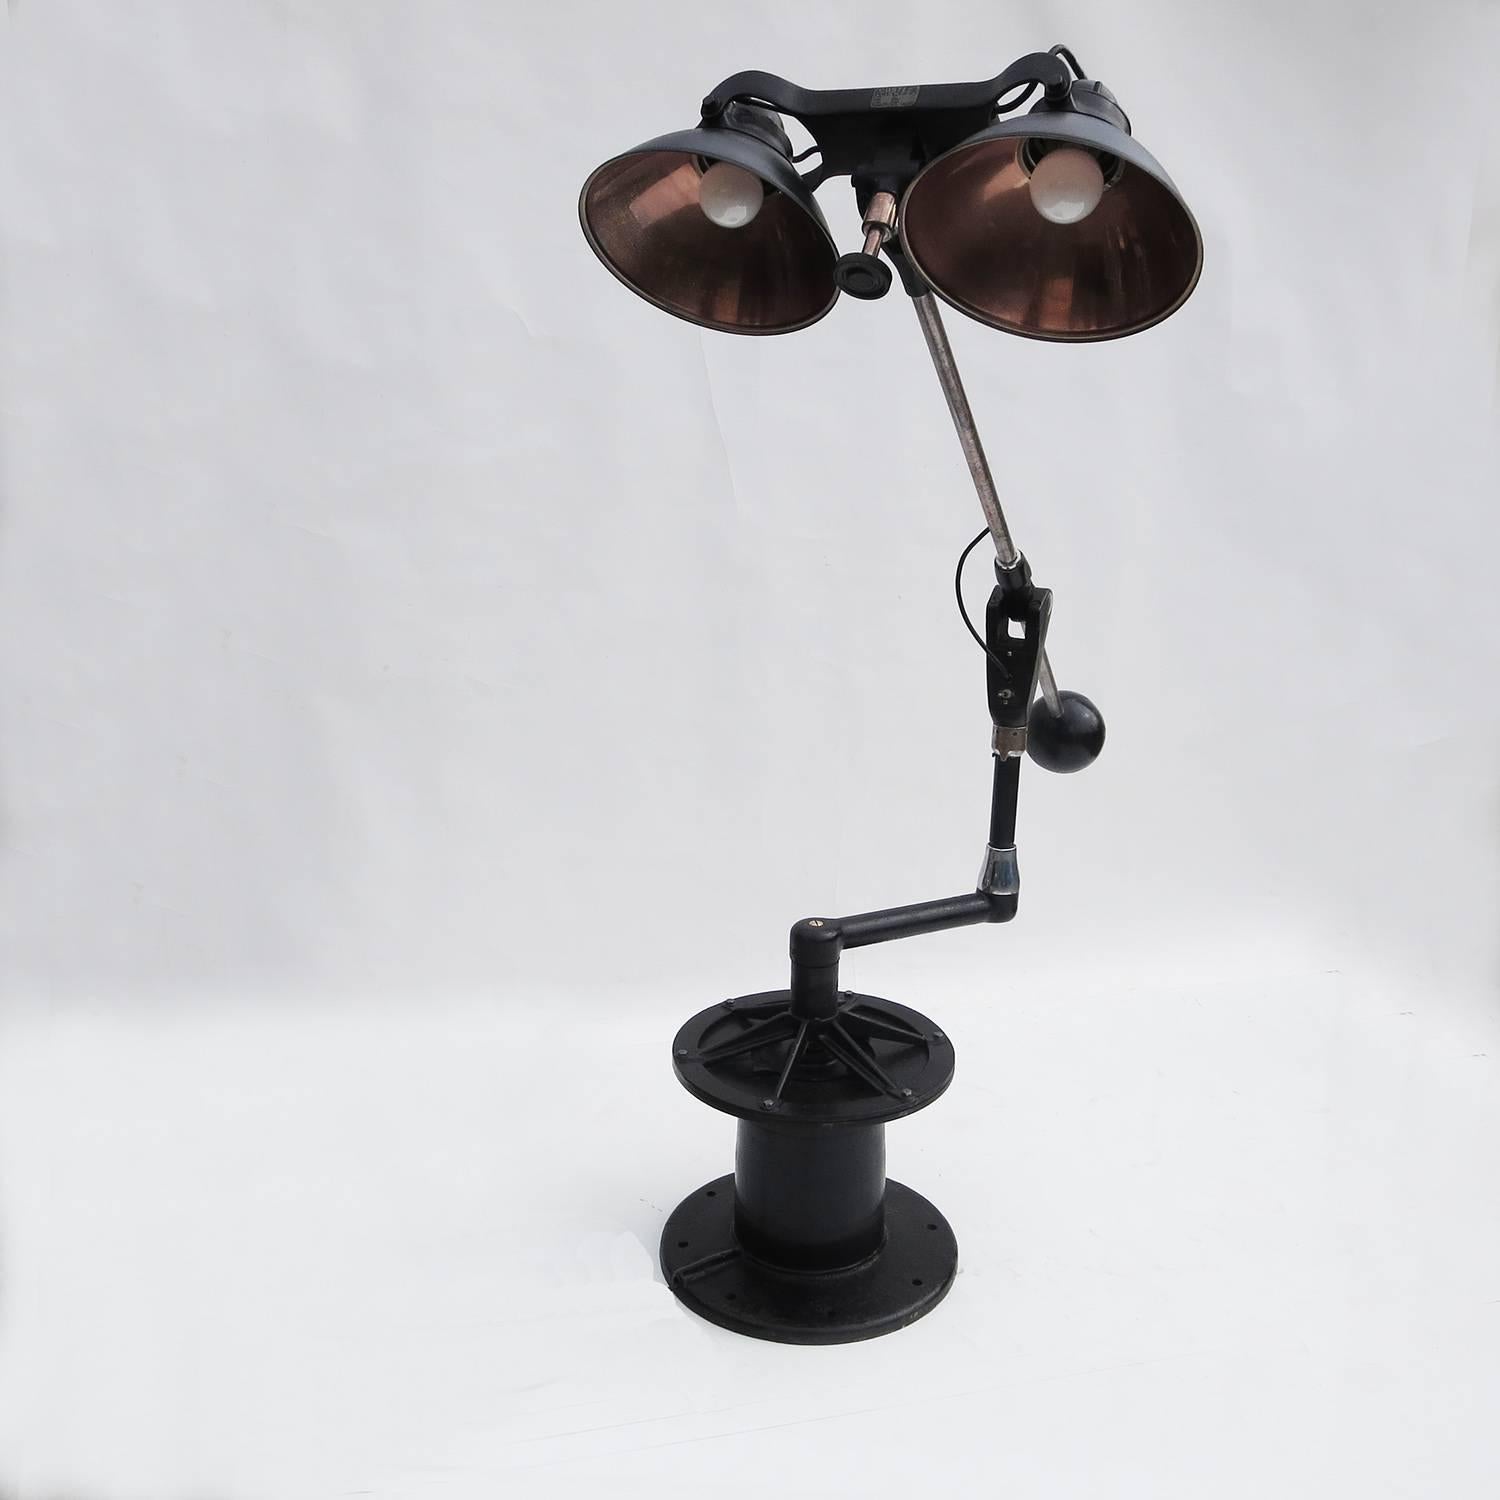 Wilmot Castle Co. of Rochester, New York primarily made surgical lamps for hospitals in the 1930s to the 1950s. We have had a few examples over the years, but never one quite as impressive as this model. The Dual lamp is balanced by a counter weight